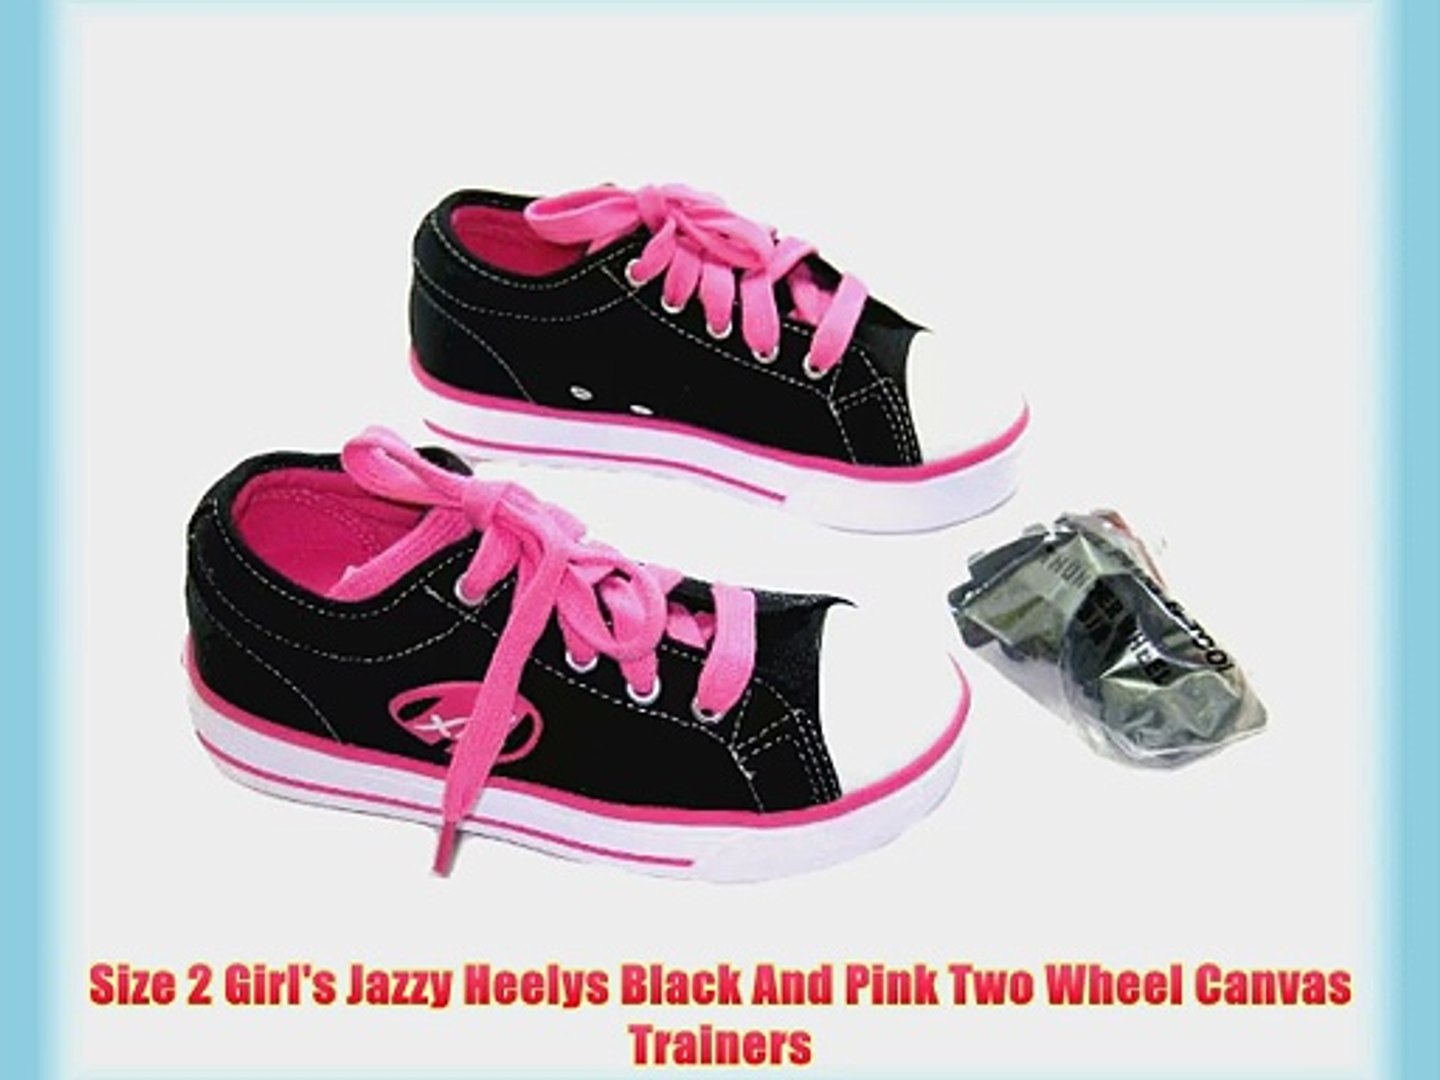 ⁣Size 2 Girl's Jazzy Heelys Black And Pink Two Wheel Canvas Trainers